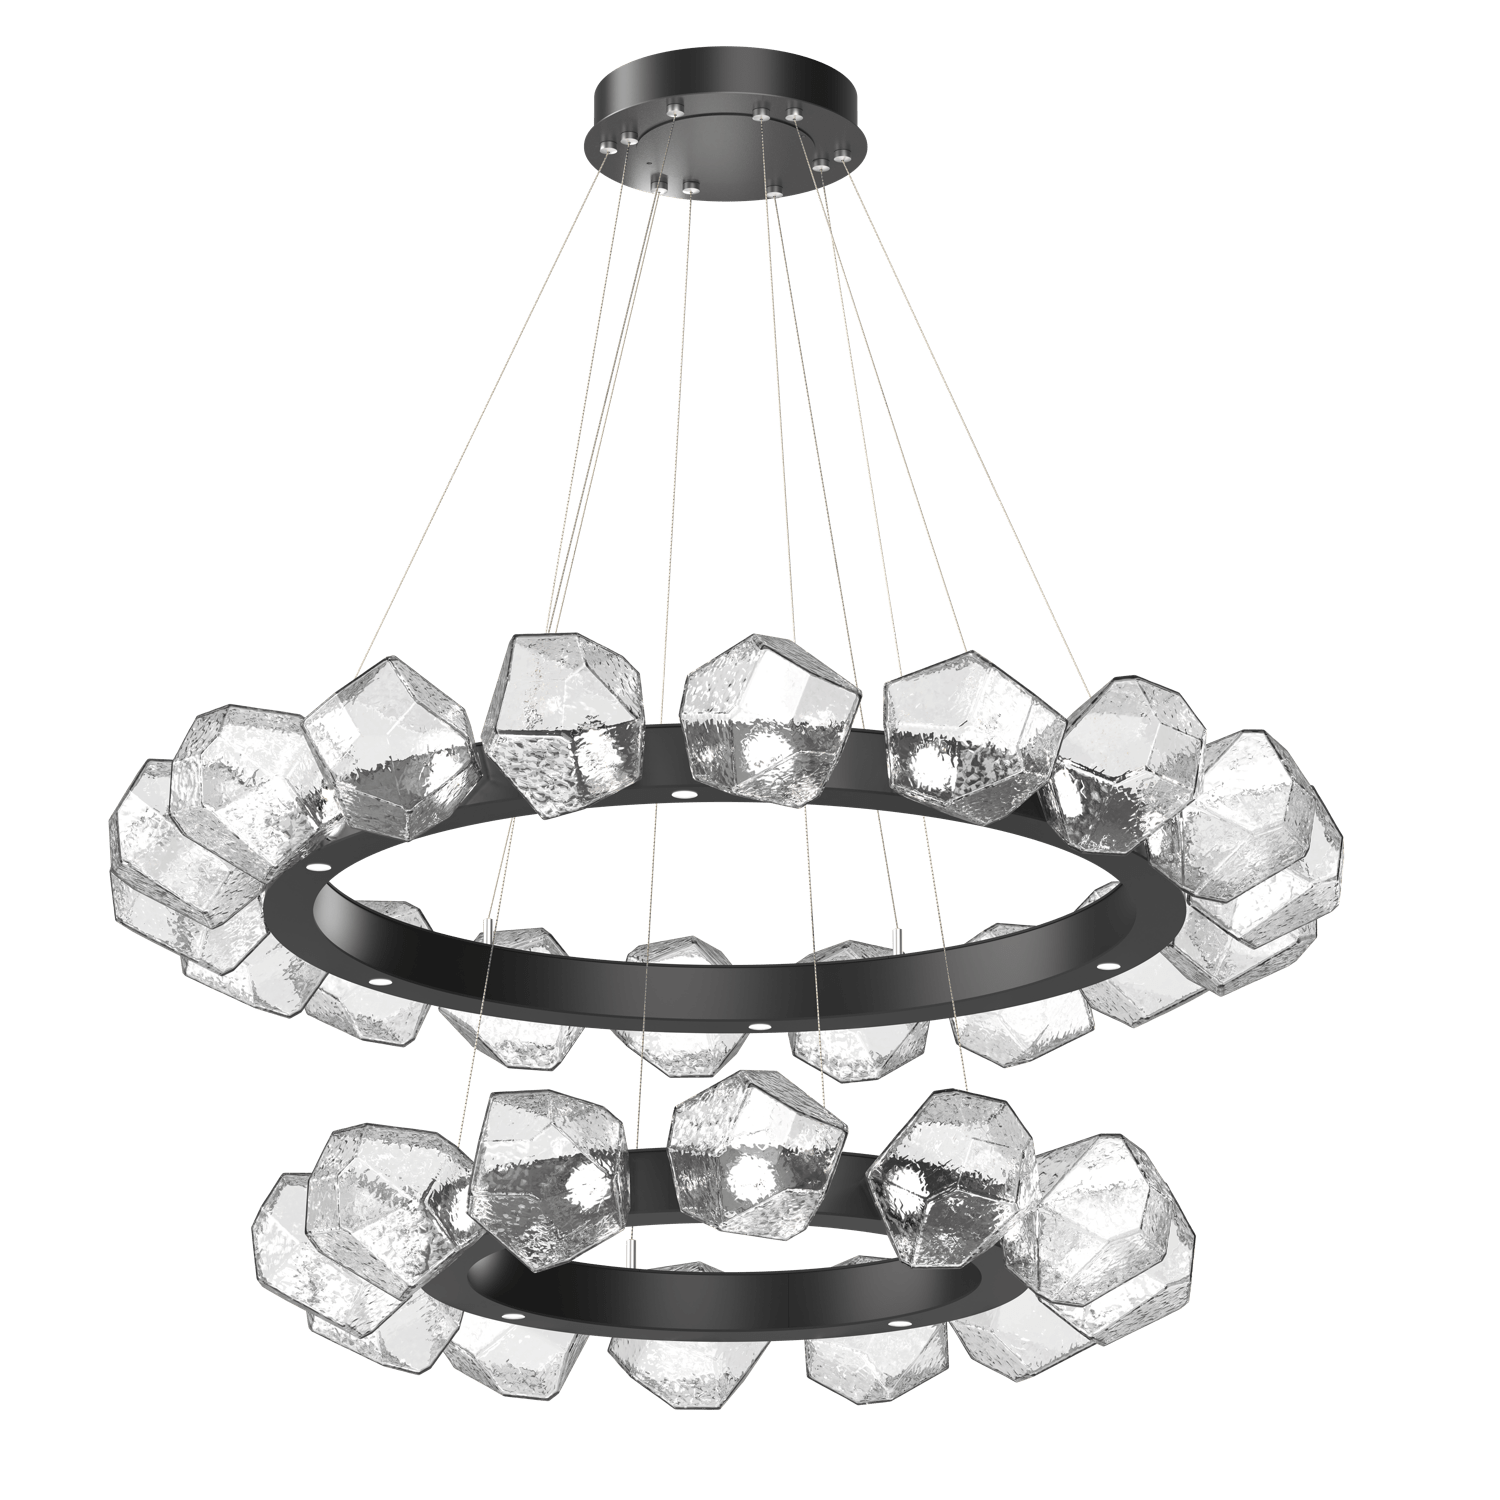 CHB0039-2T-MB-C-Hammerton-Studio-Gem-48-inch-two-tier-radial-ring-chandelier-with-matte-black-finish-and-clear-blown-glass-shades-and-LED-lamping